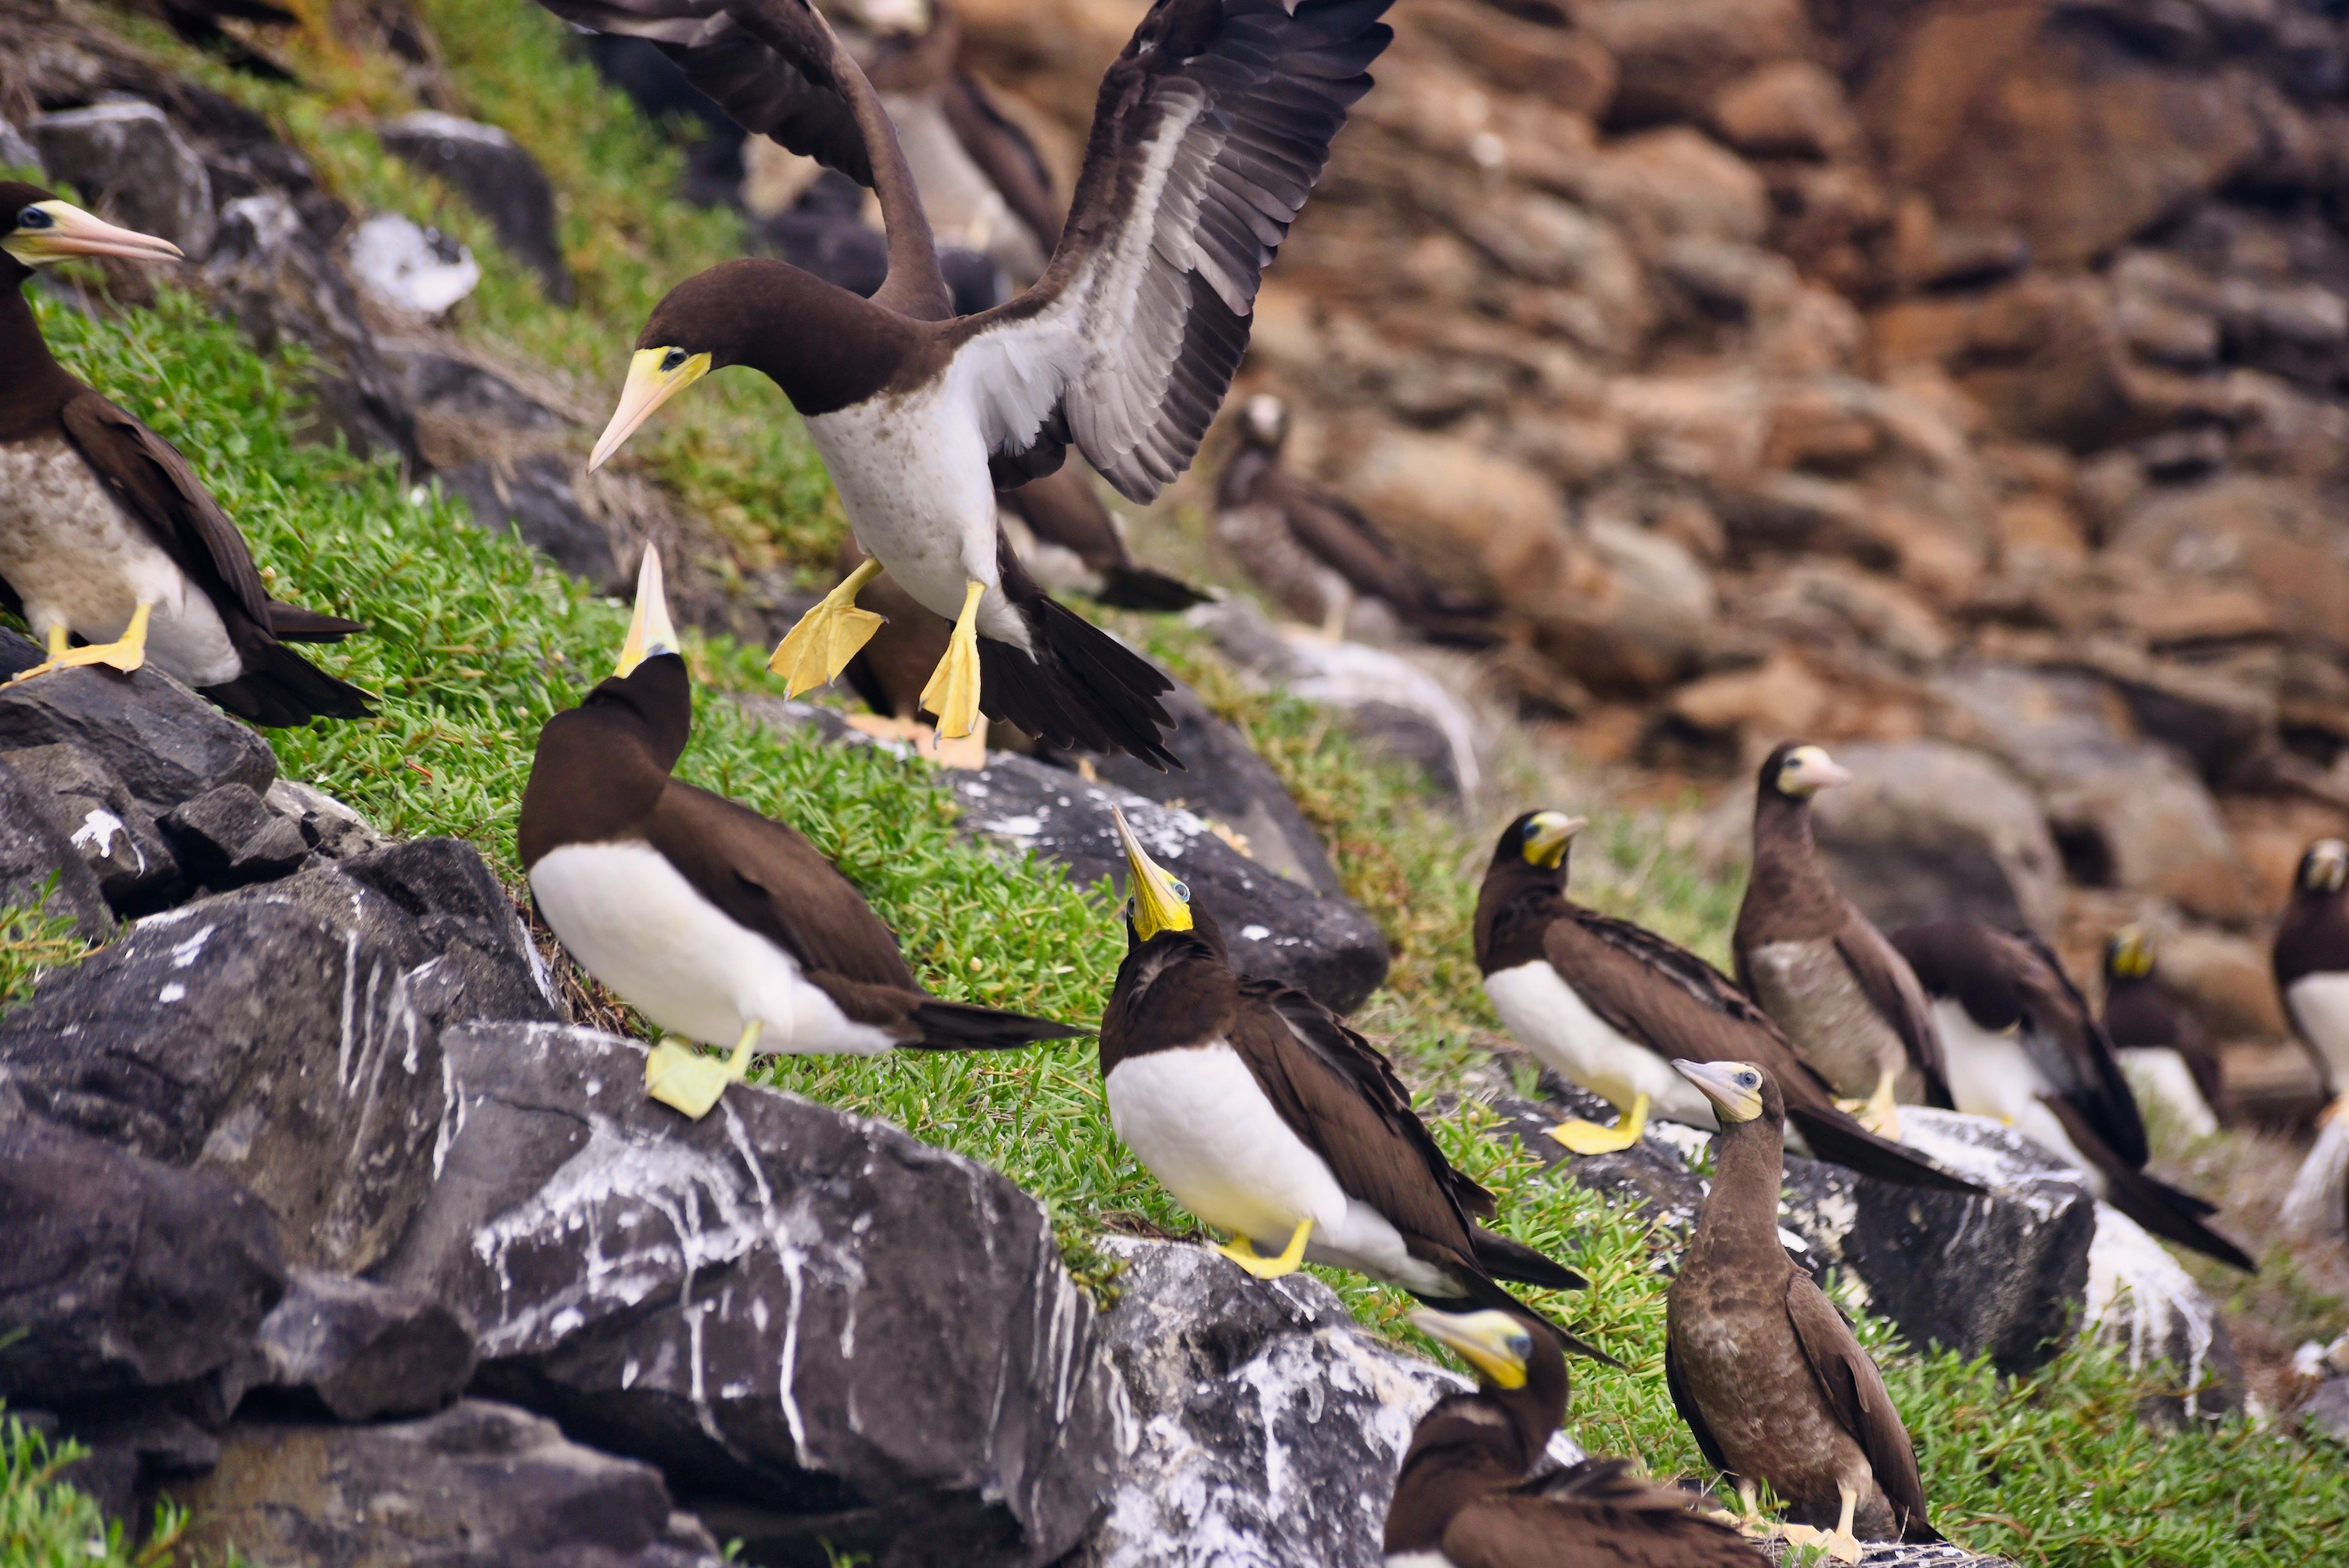 Brown booby colony at Caieiras Beach. Photo by Pierre Constant